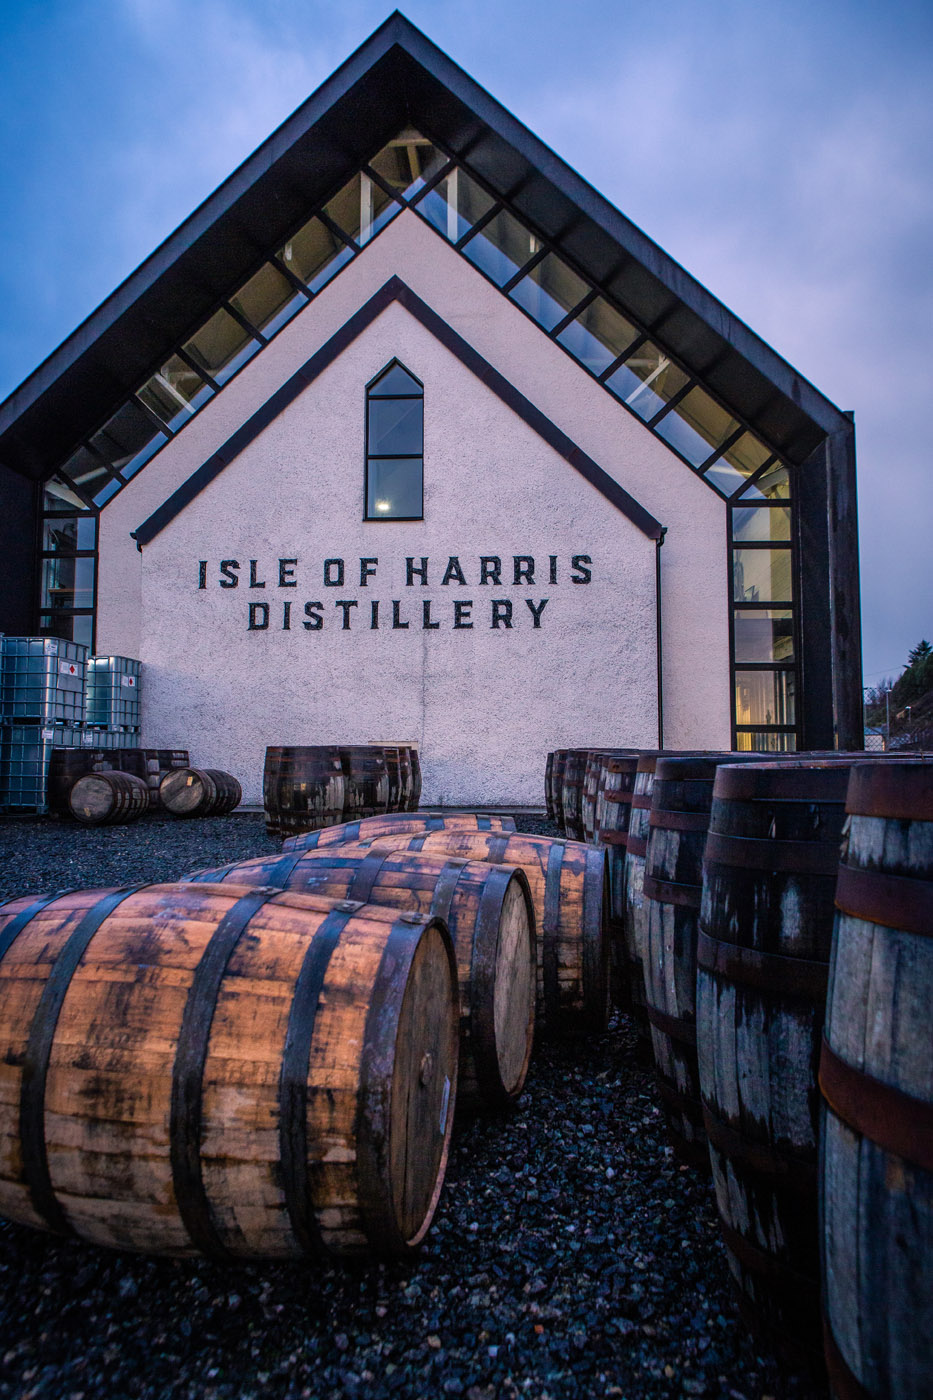 Isle of Harris Distillery prepares for launch of first whisky